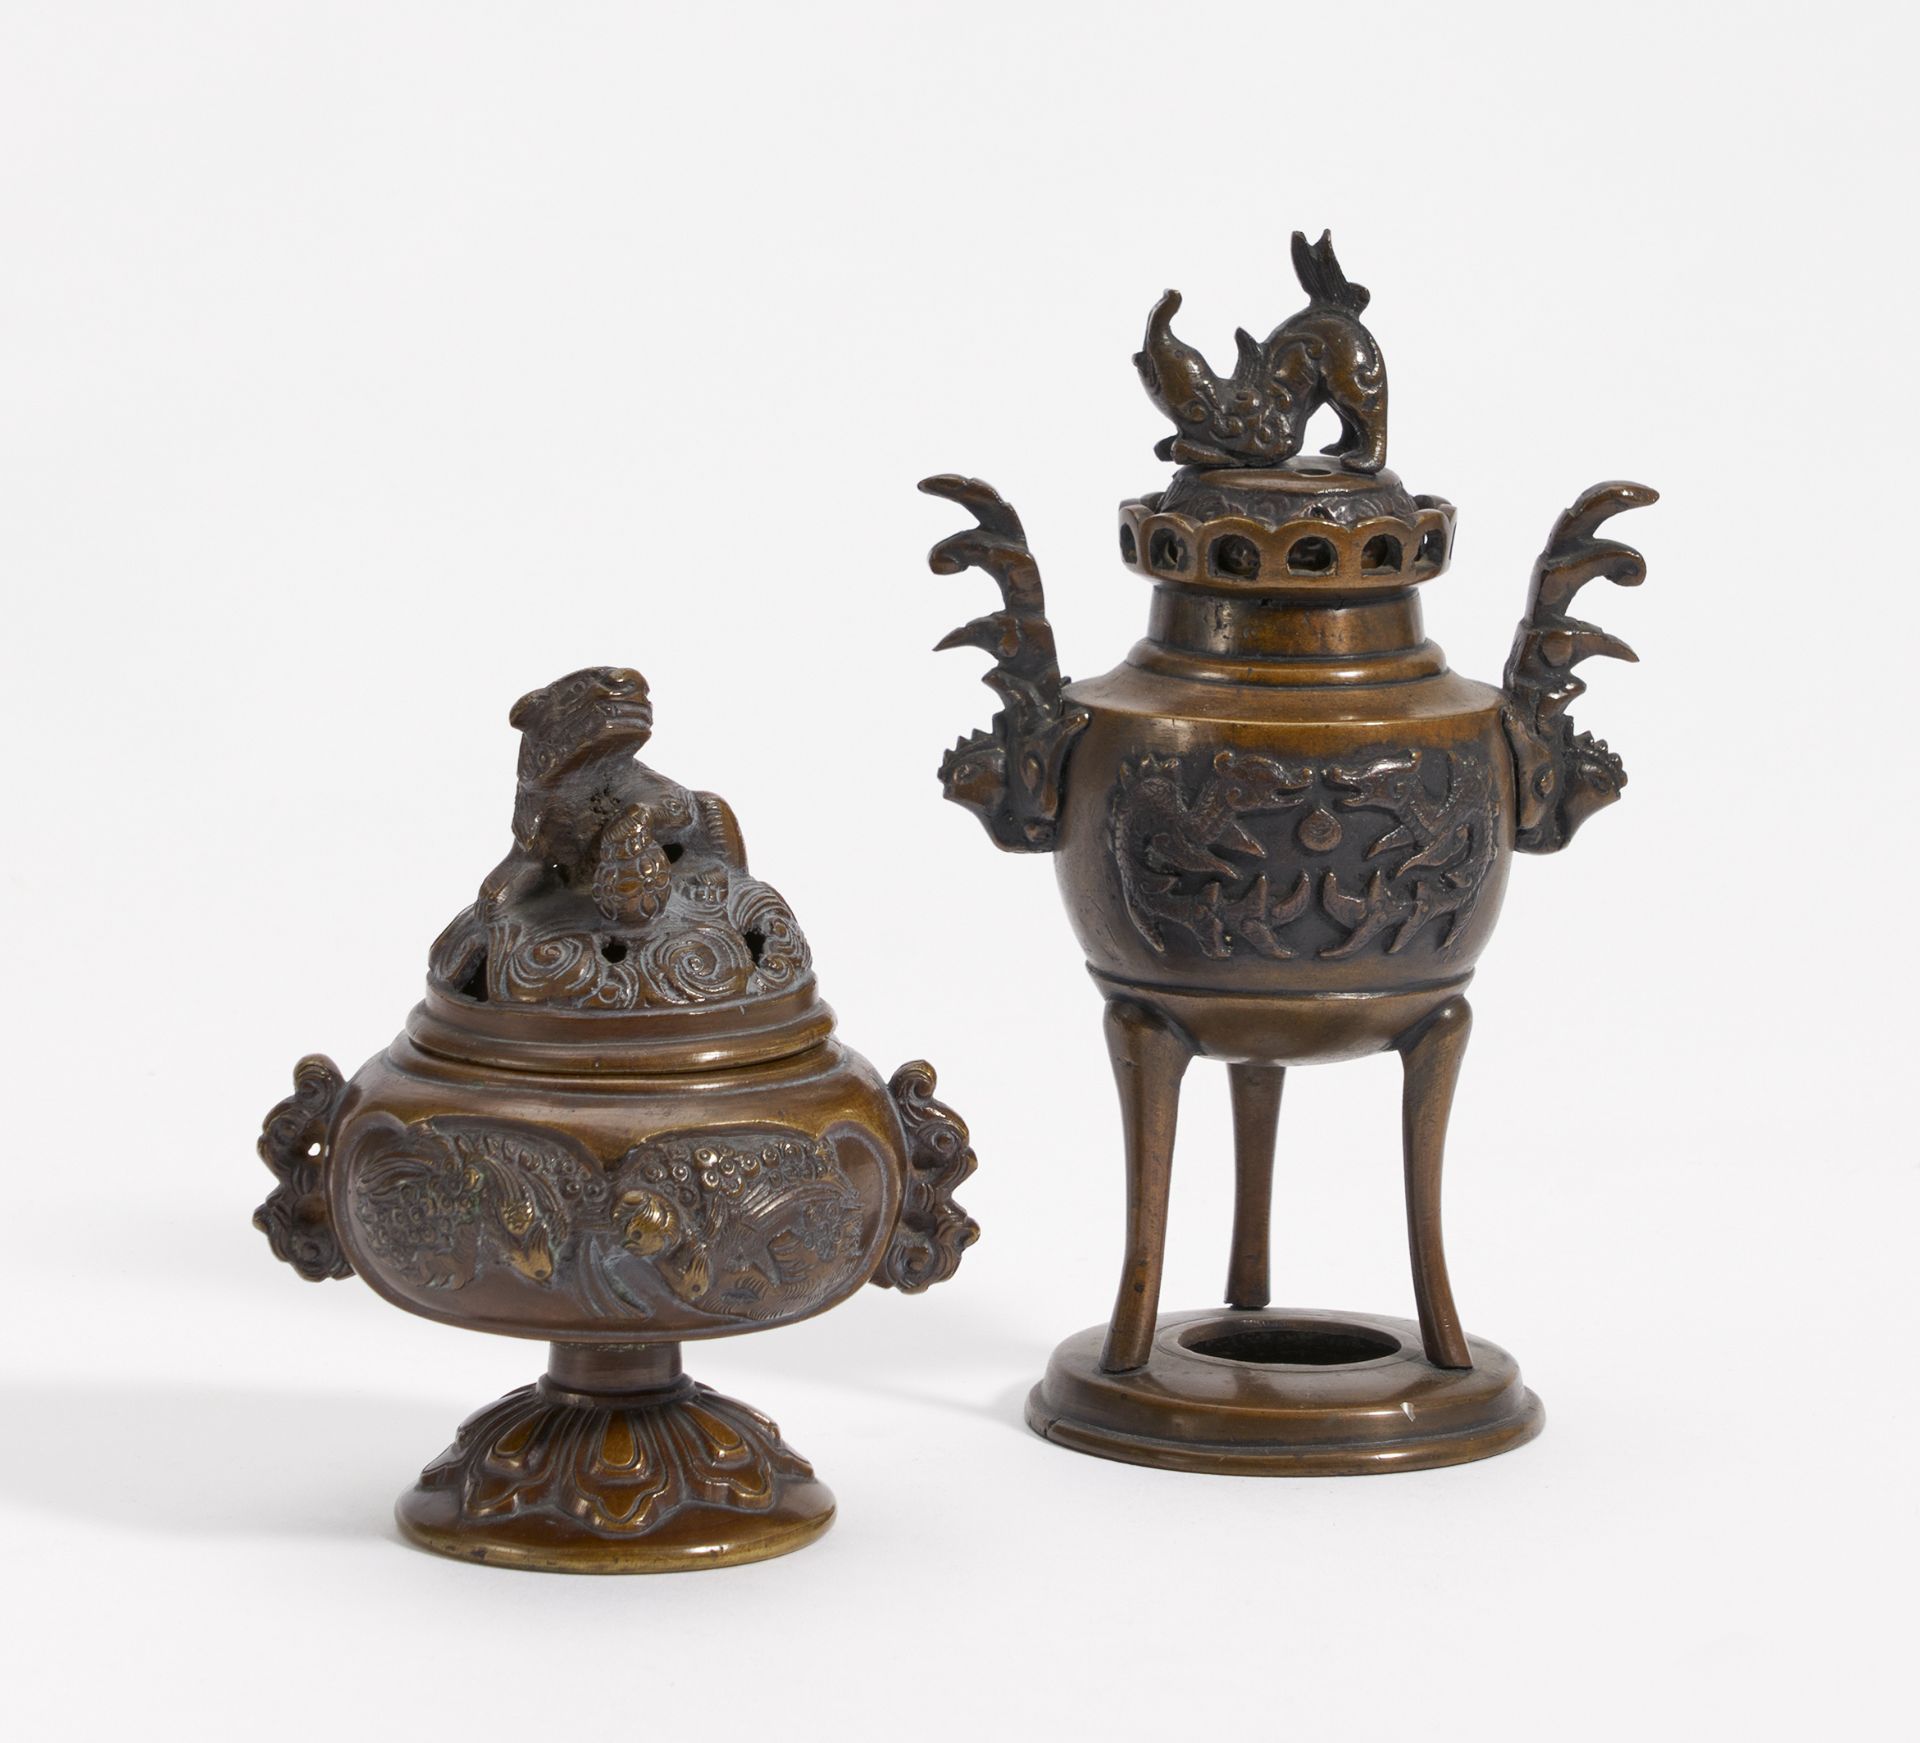 TWO SMALL CENSER WITH LION. Japan. Meiji period. Ca. 1900. Bronze with dark patina. H.11.5/16.5cm.